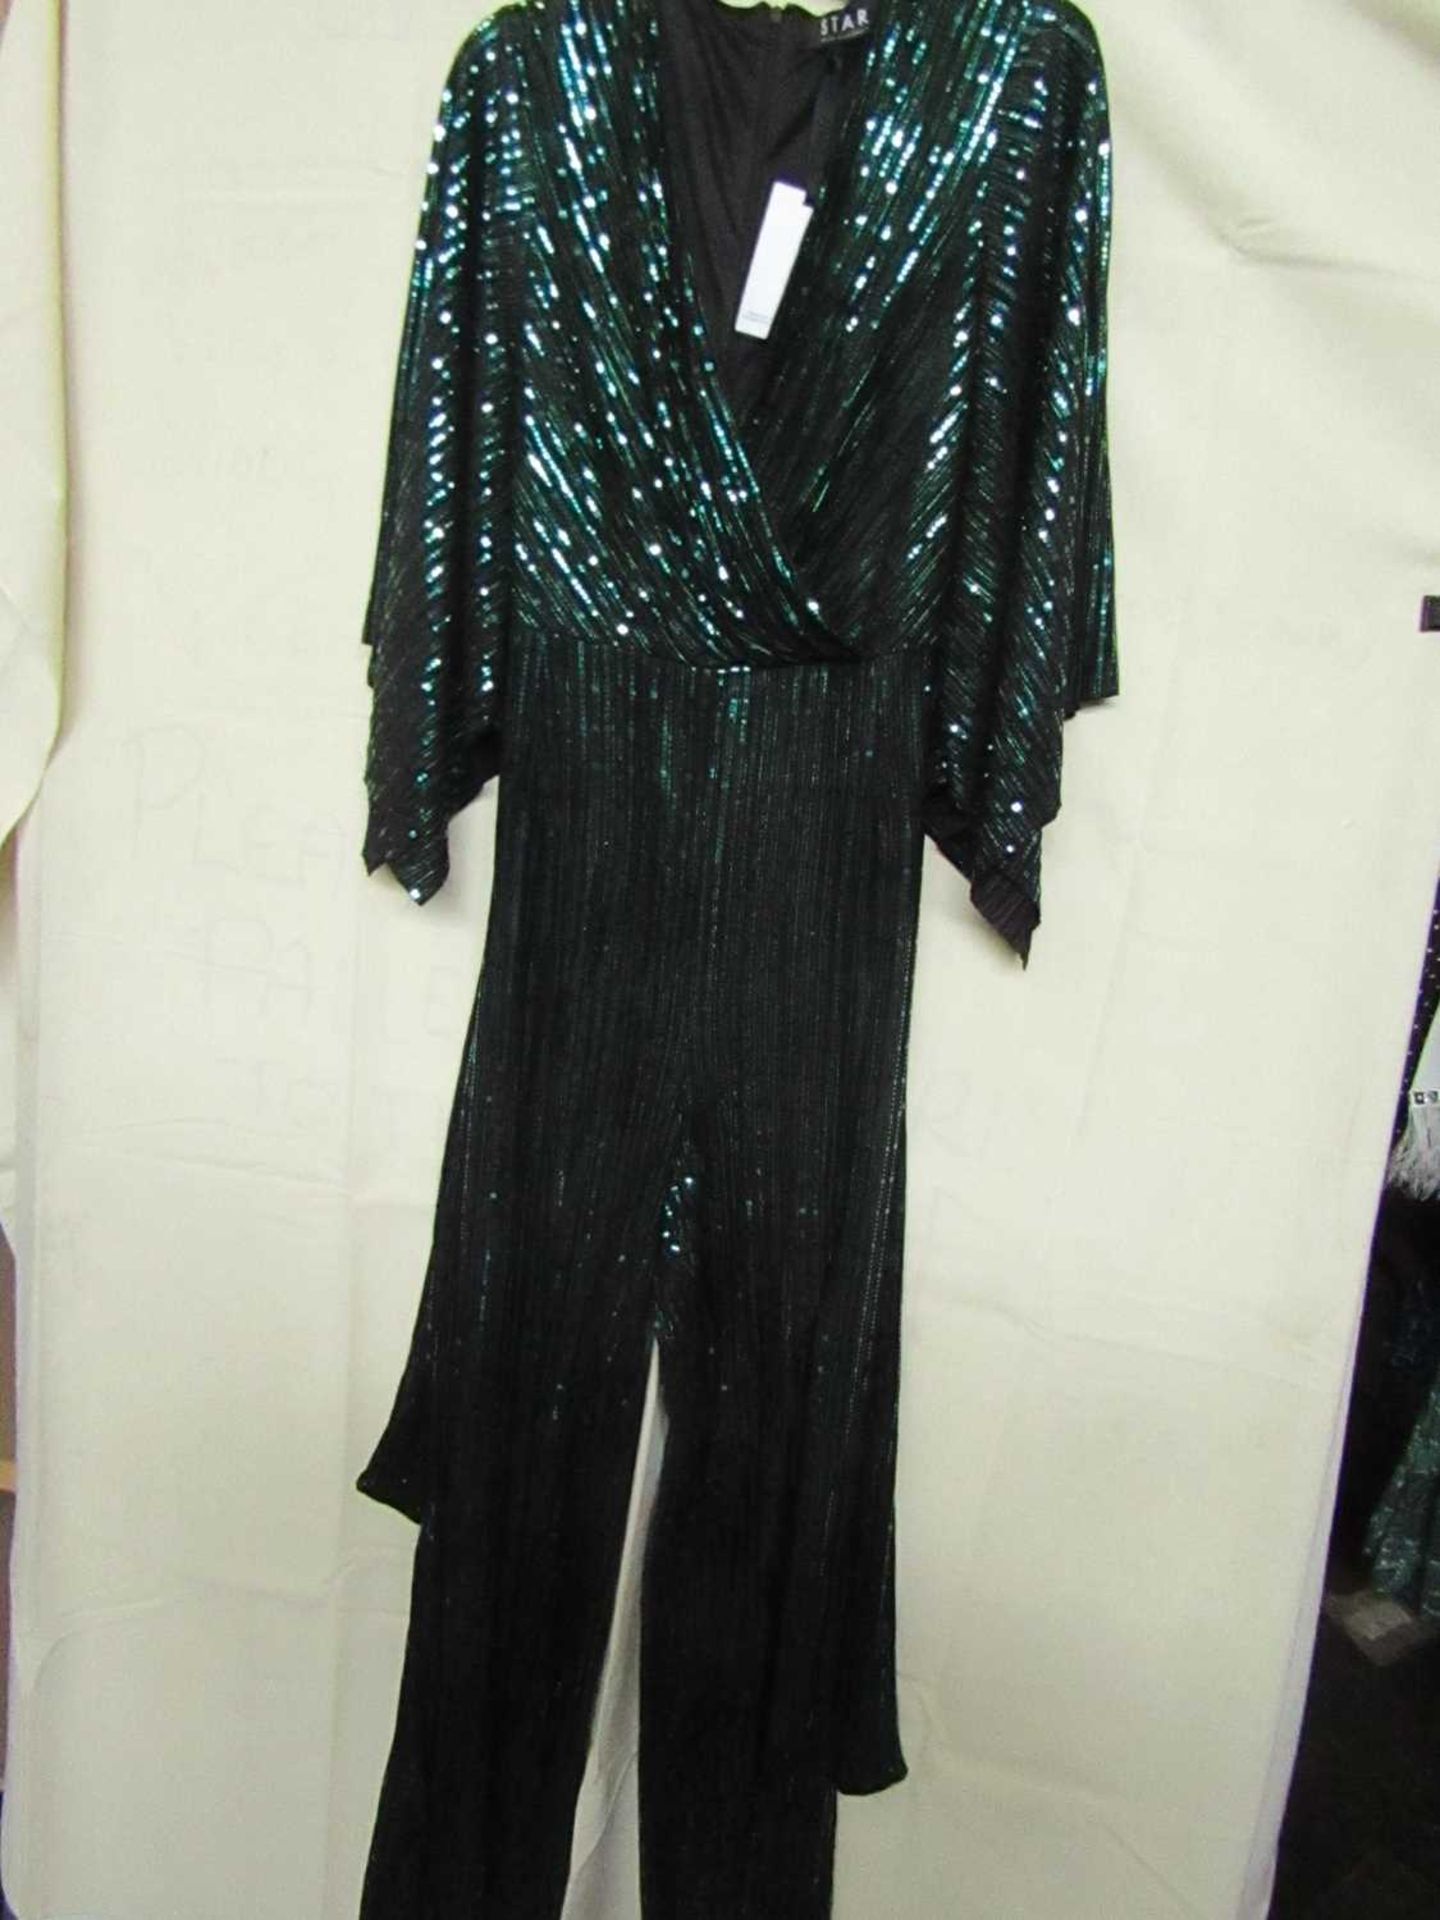 VAT Star By Julien Macdonald Sequinced Jumpsuit Green New With Tags